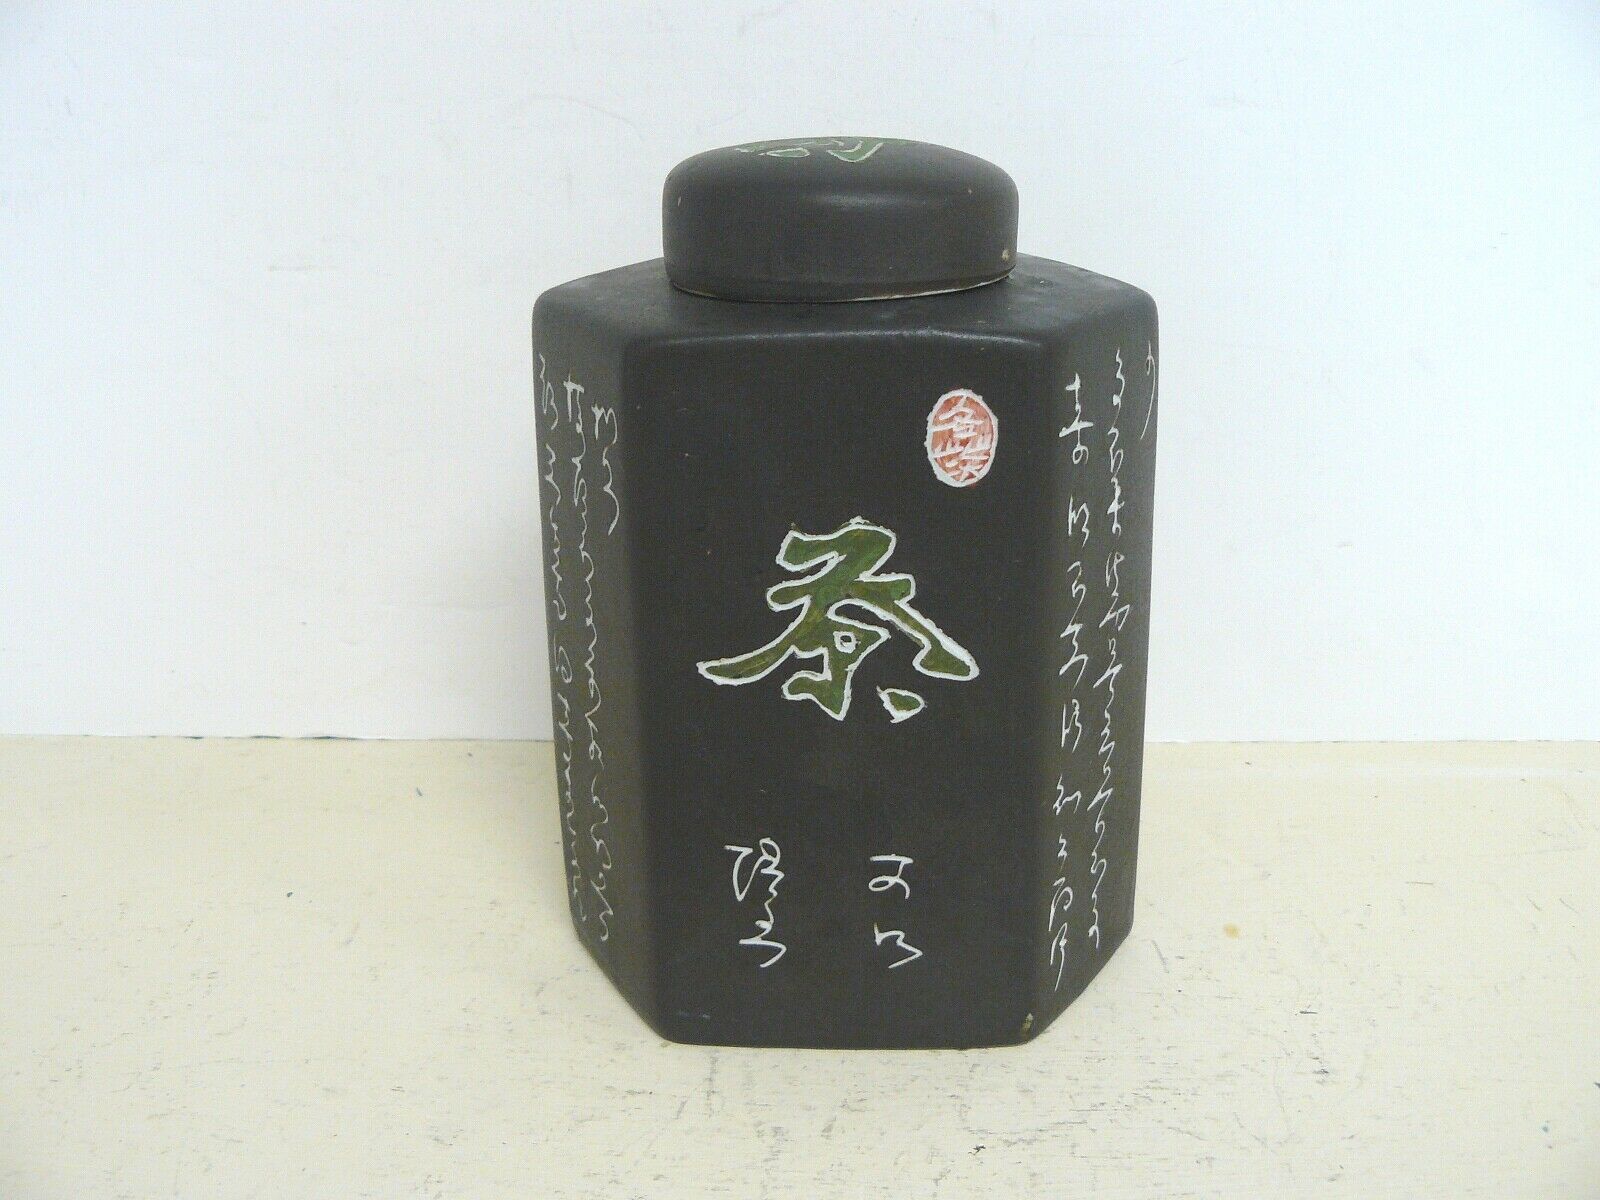 Vintage Japan Ceramic Tea Caddy With Incised Calligraphy Decoration Panels